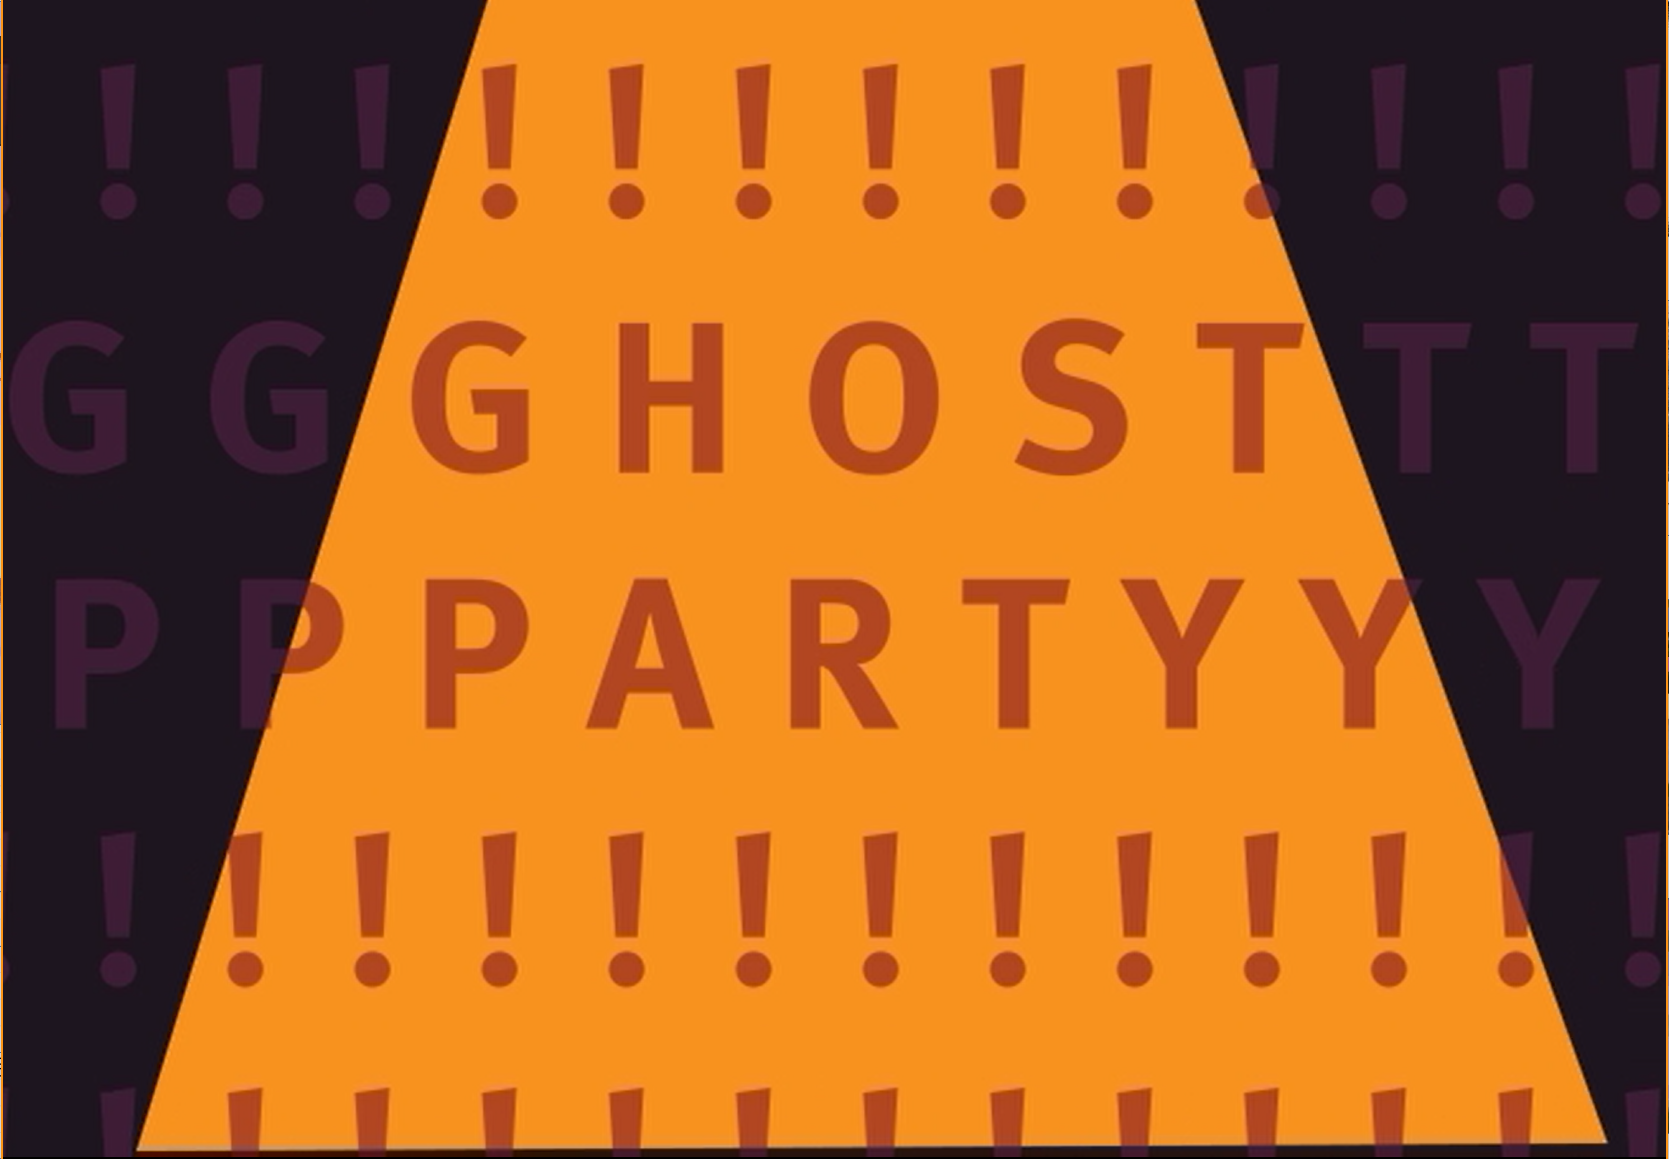 GHOST PARTY